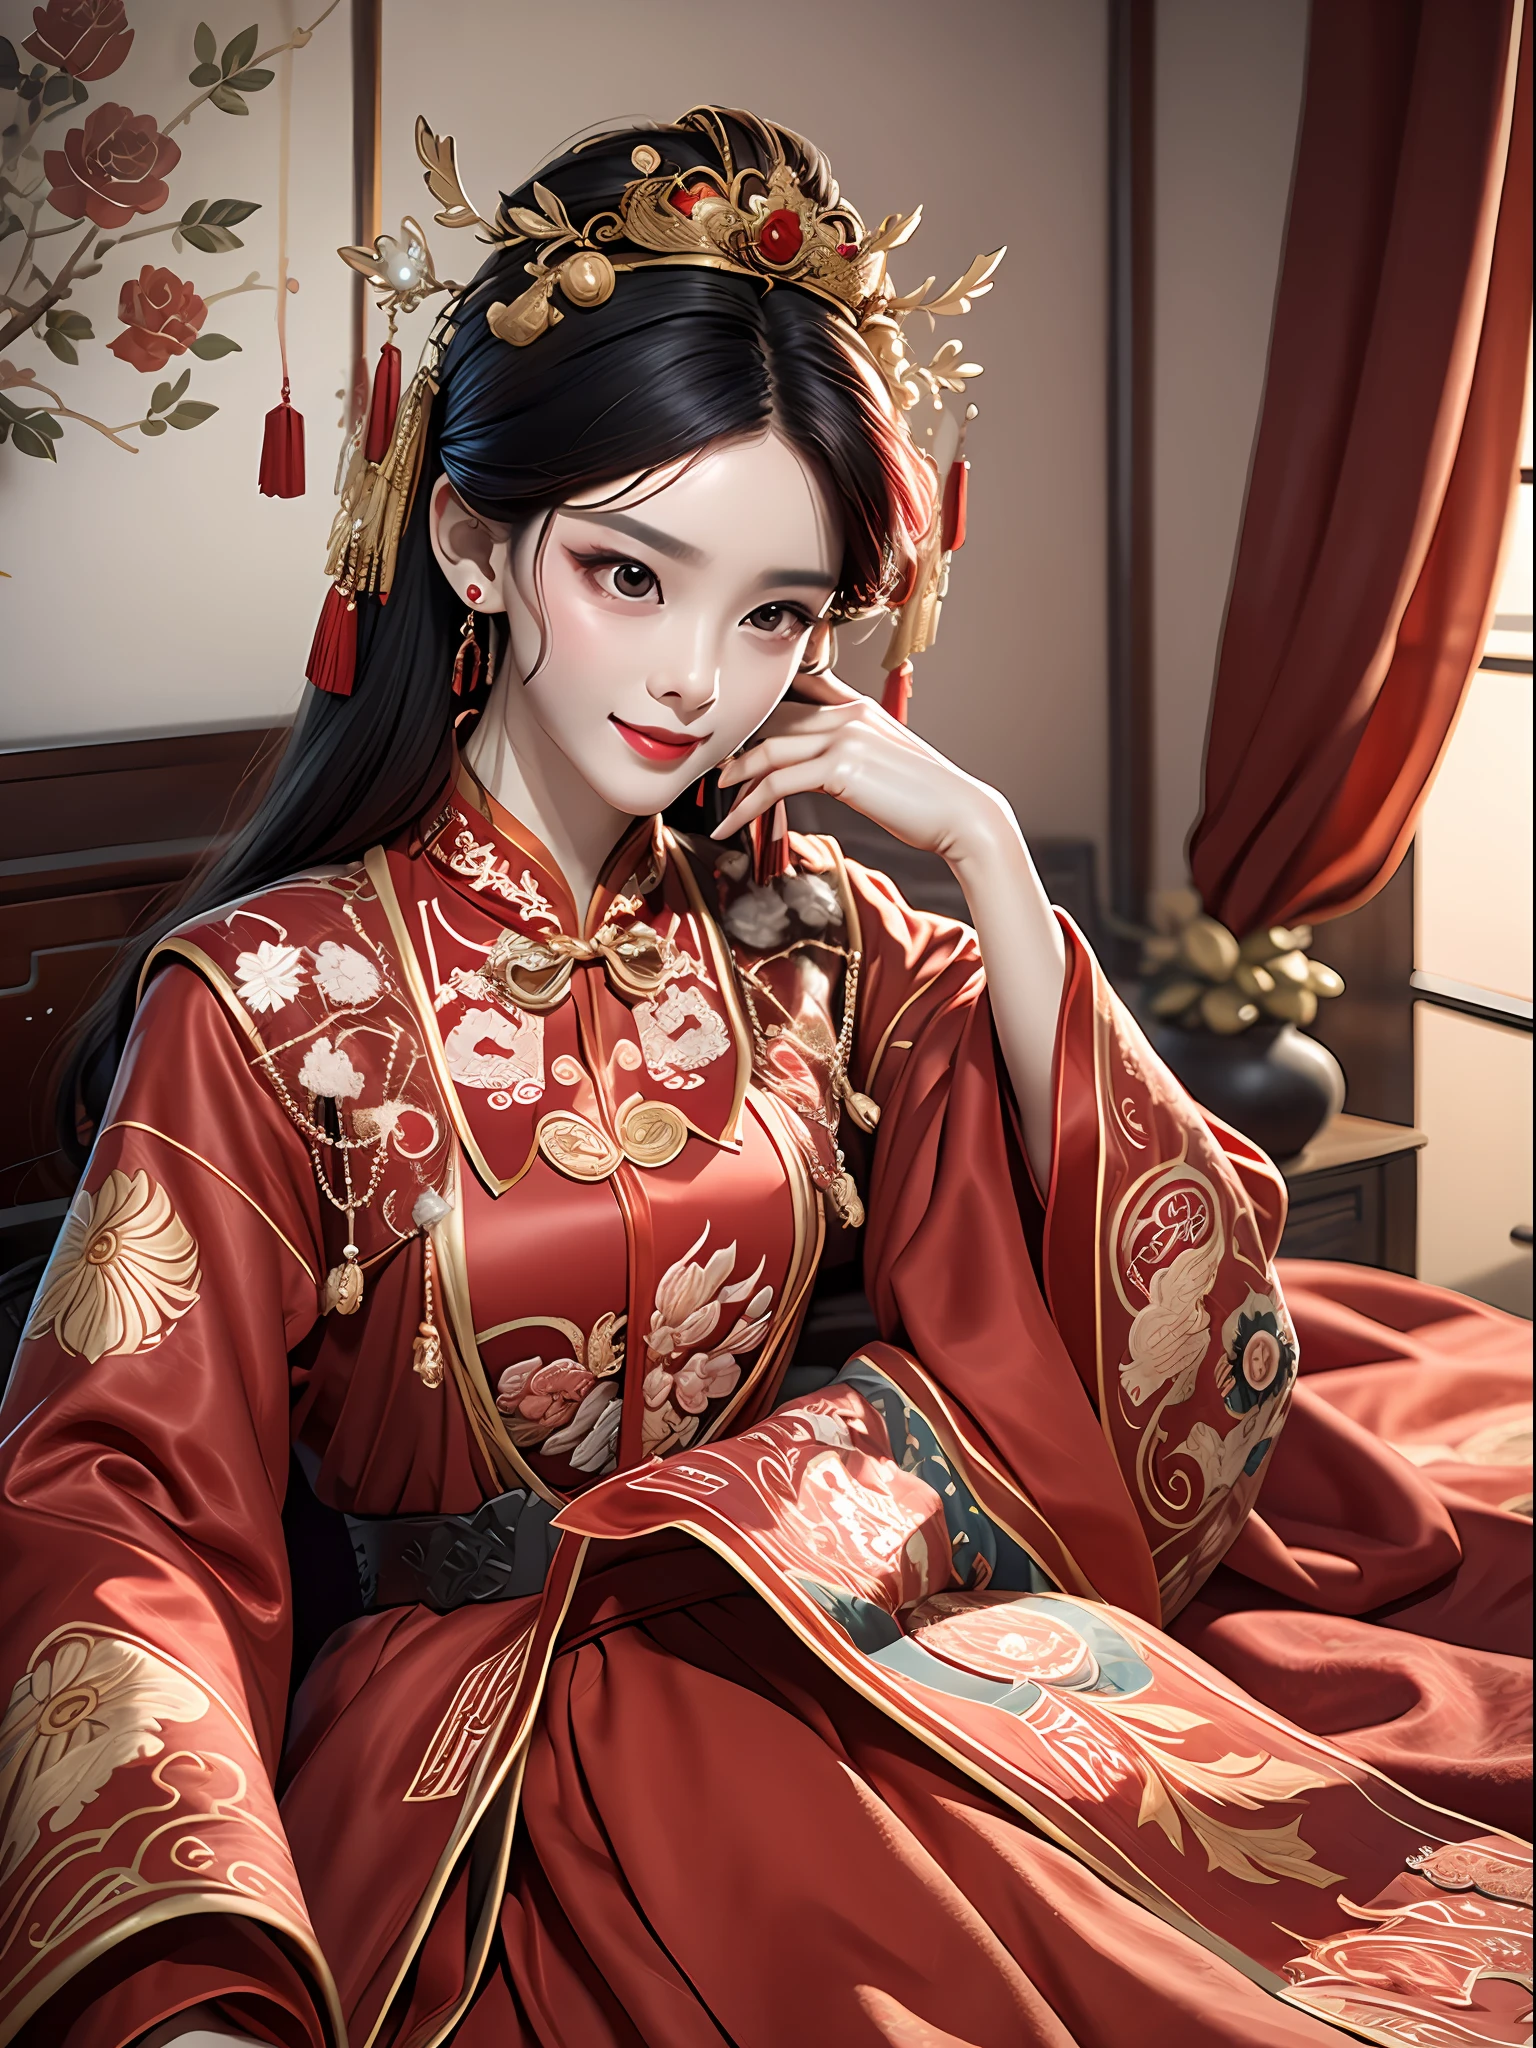 Best quality: 1.1), (Realistic: 1.1), (Photography: 1.1), (highly details: 1.1), A man wears a red and gold dress，Woman with a crown on her head, A hair stick, (sitting on red bed), Blushing, Shy, black_Hair, crown, Looking down, (2 red candles), Chinese_clothes, Curtains, Earrings, Hair_decorations, Hanfu, interiors, jewelry, Long_Sleeves, Red dress, Redlip, nipple tassels, (Red quilt), (red palace: 1.2), (3DMM),mix4,